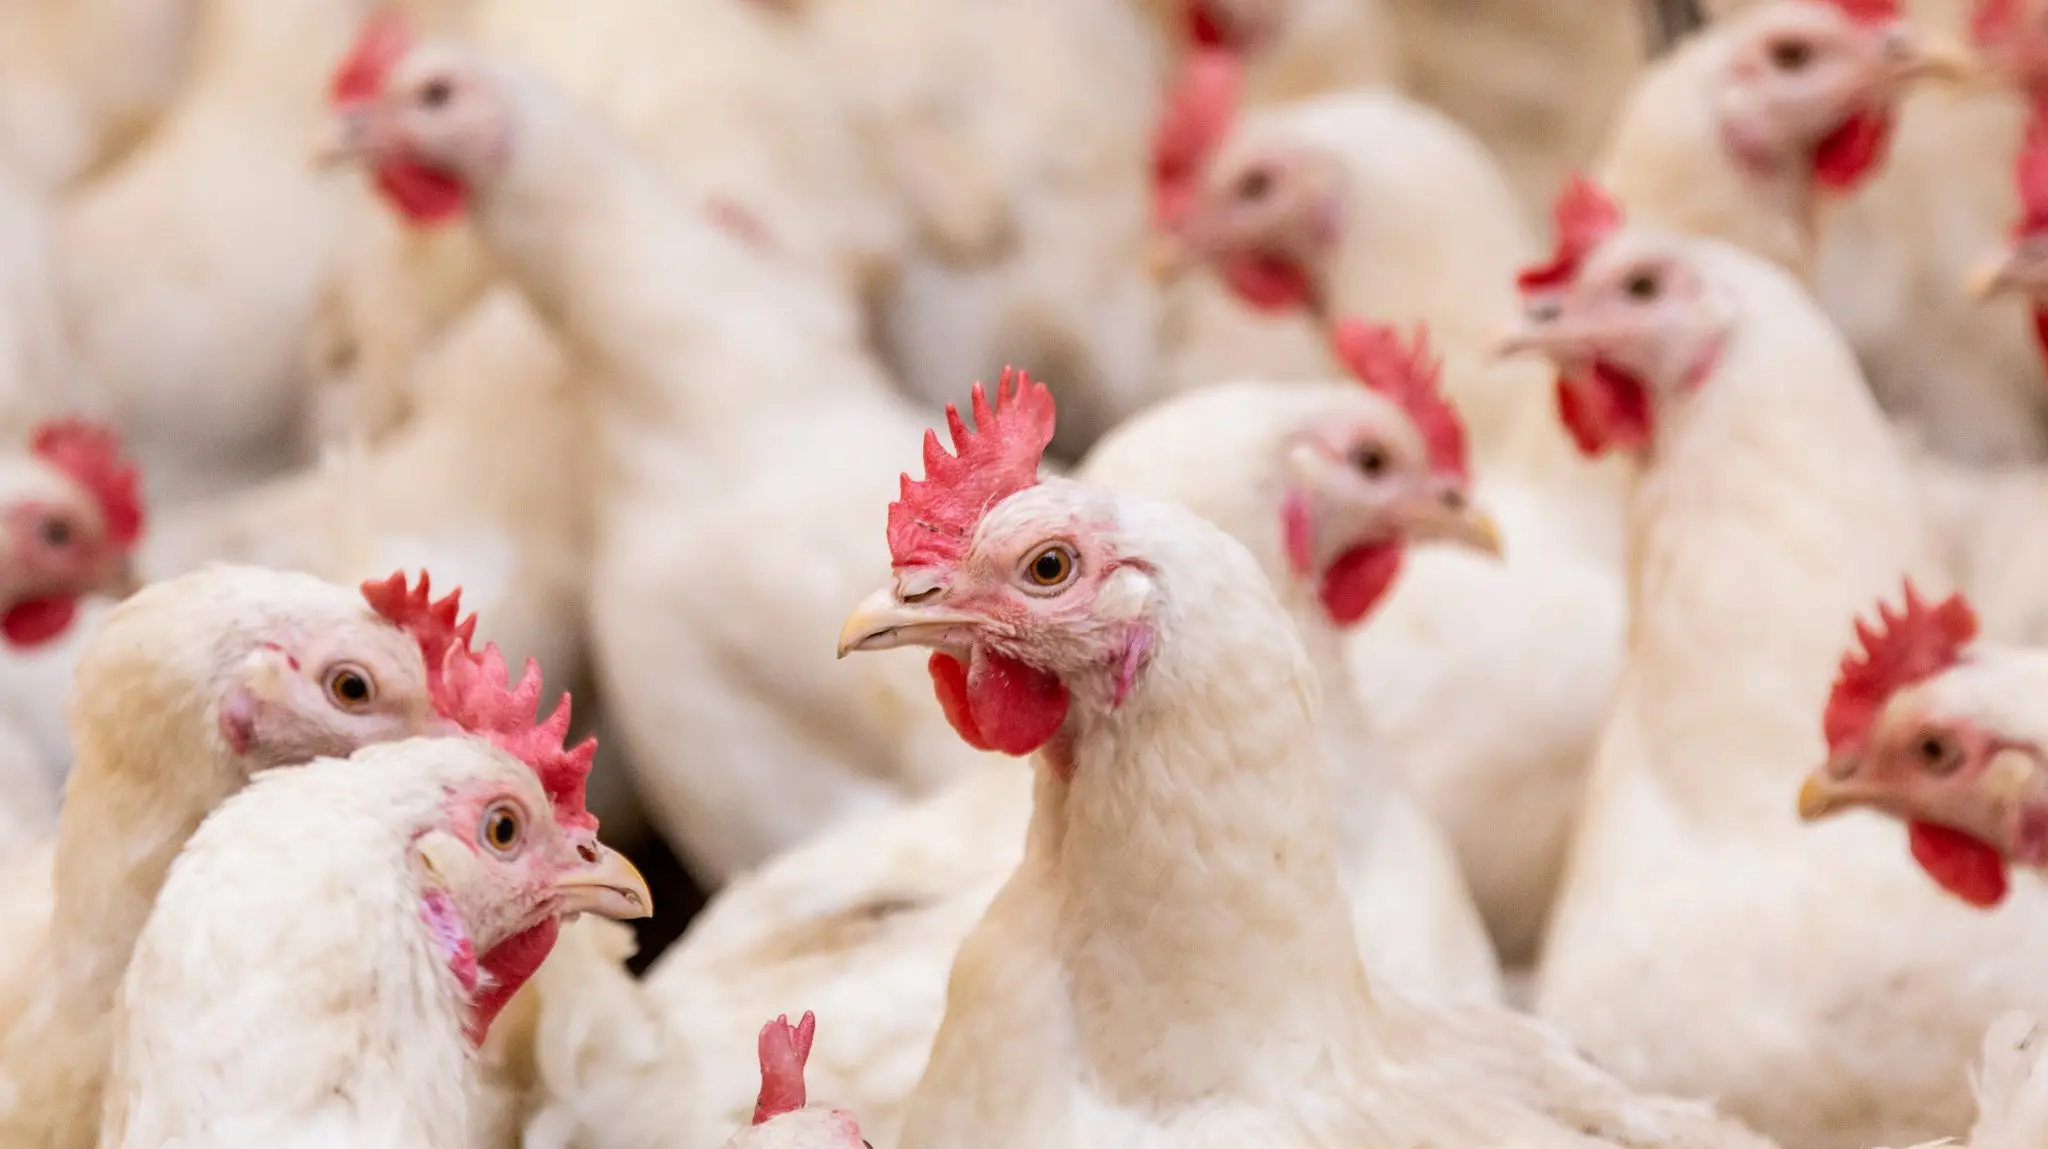 Featured image for “Avian flu confirmed on New Castle County poultry farm”